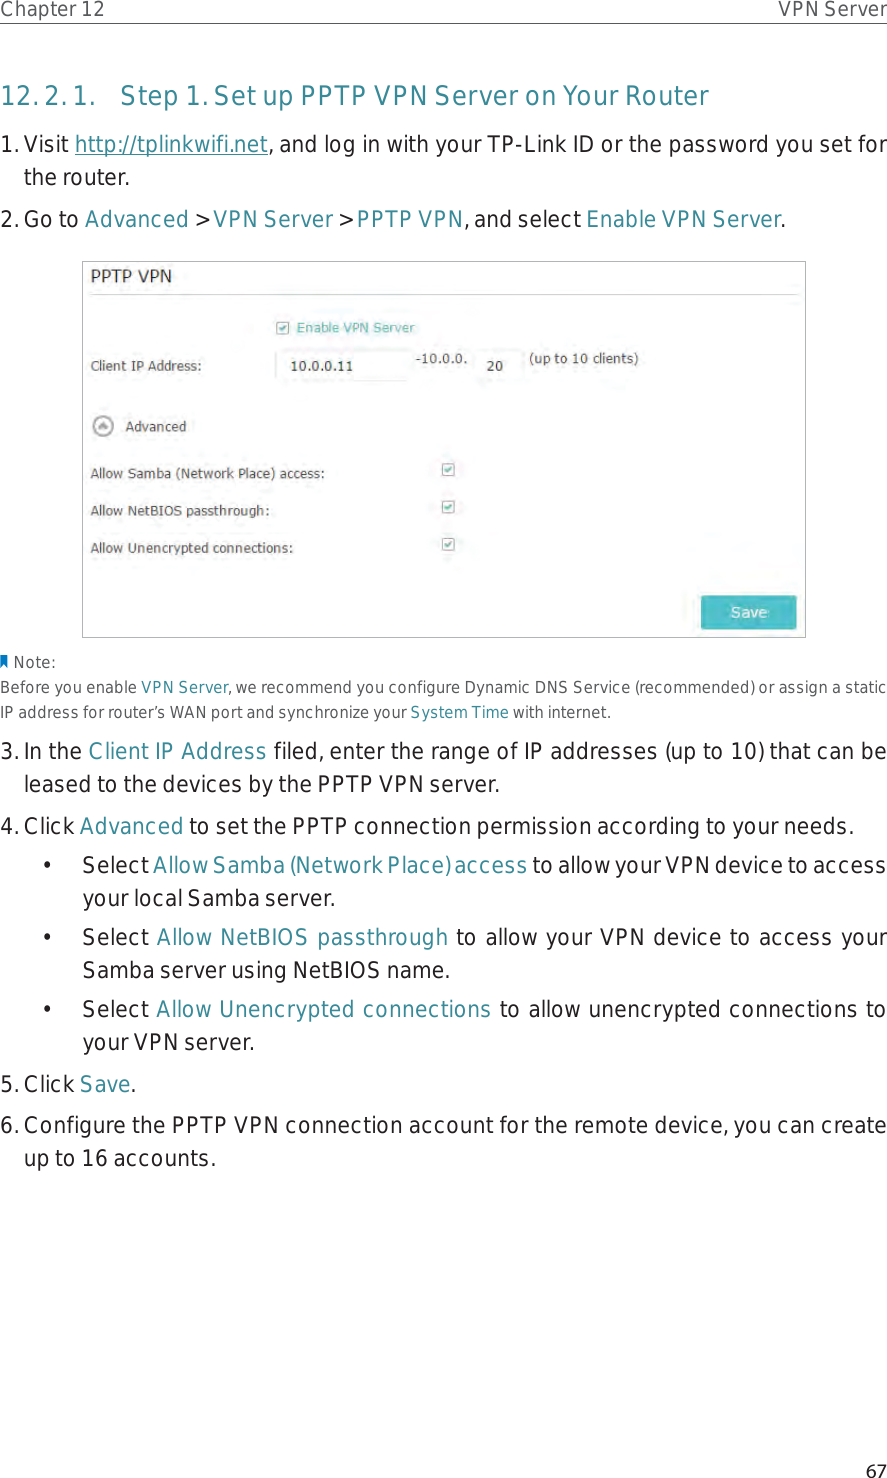 67Chapter 12 VPN Server12. 2. 1.  Step 1. Set up PPTP VPN Server on Your Router1. Visit http://tplinkwifi.net, and log in with your TP-Link ID or the password you set for the router.2. Go to Advanced &gt; VPN Server &gt; PPTP VPN, and select Enable VPN Server.Note:Before you enable VPN Server, we recommend you configure Dynamic DNS Service (recommended) or assign a static IP address for router’s WAN port and synchronize your System Time with internet.3. In the Client IP Address filed, enter the range of IP addresses (up to 10) that can be leased to the devices by the PPTP VPN server.4. Click Advanced to set the PPTP connection permission according to your needs.• Select Allow Samba (Network Place) access to allow your VPN device to access your local Samba server.• Select Allow NetBIOS passthrough to allow your VPN device to access your Samba server using NetBIOS name.• Select Allow Unencrypted connections to allow unencrypted connections to your VPN server.5. Click Save.6. Configure the PPTP VPN connection account for the remote device, you can create up to 16 accounts.